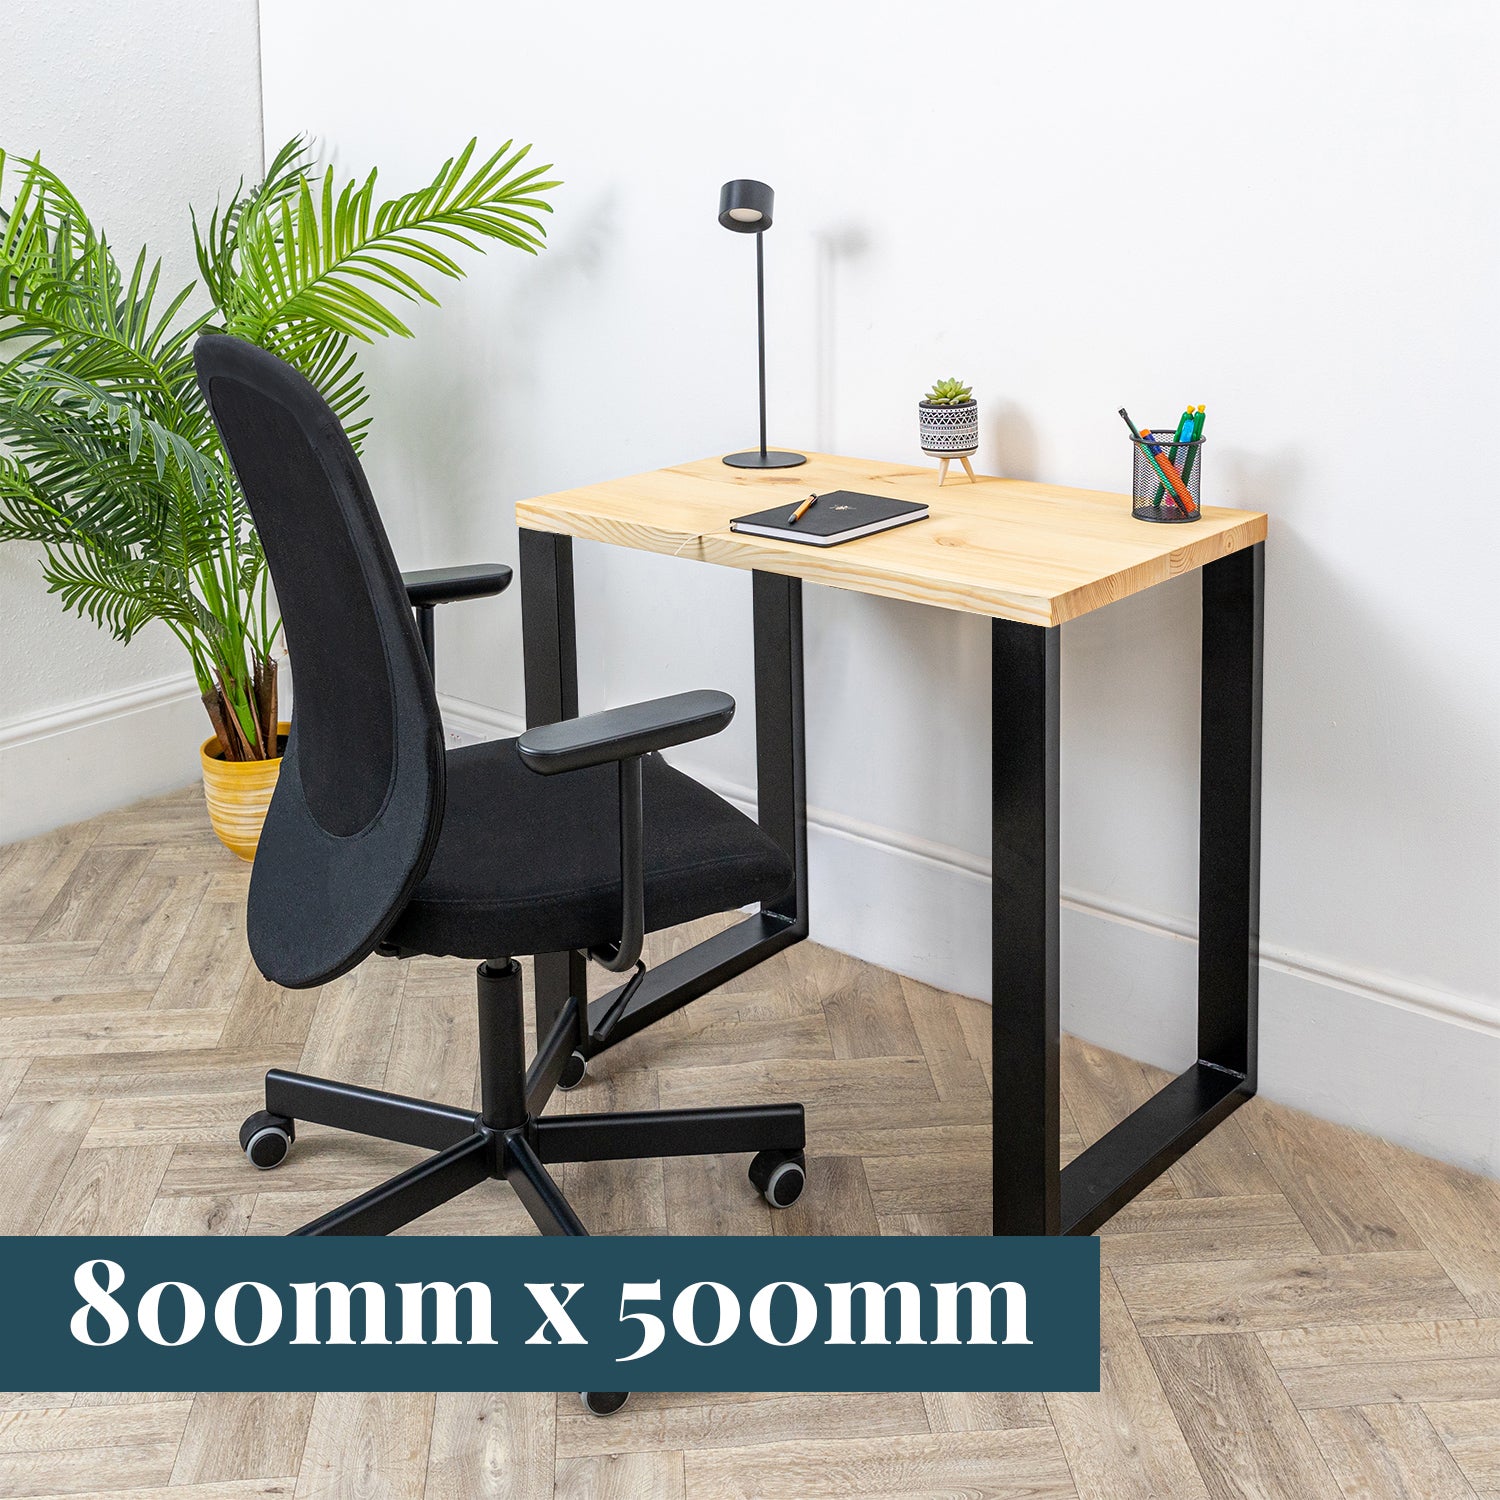 Pine Solid Wood Desk with Square Metal Legs #length_800mm depth_500mm